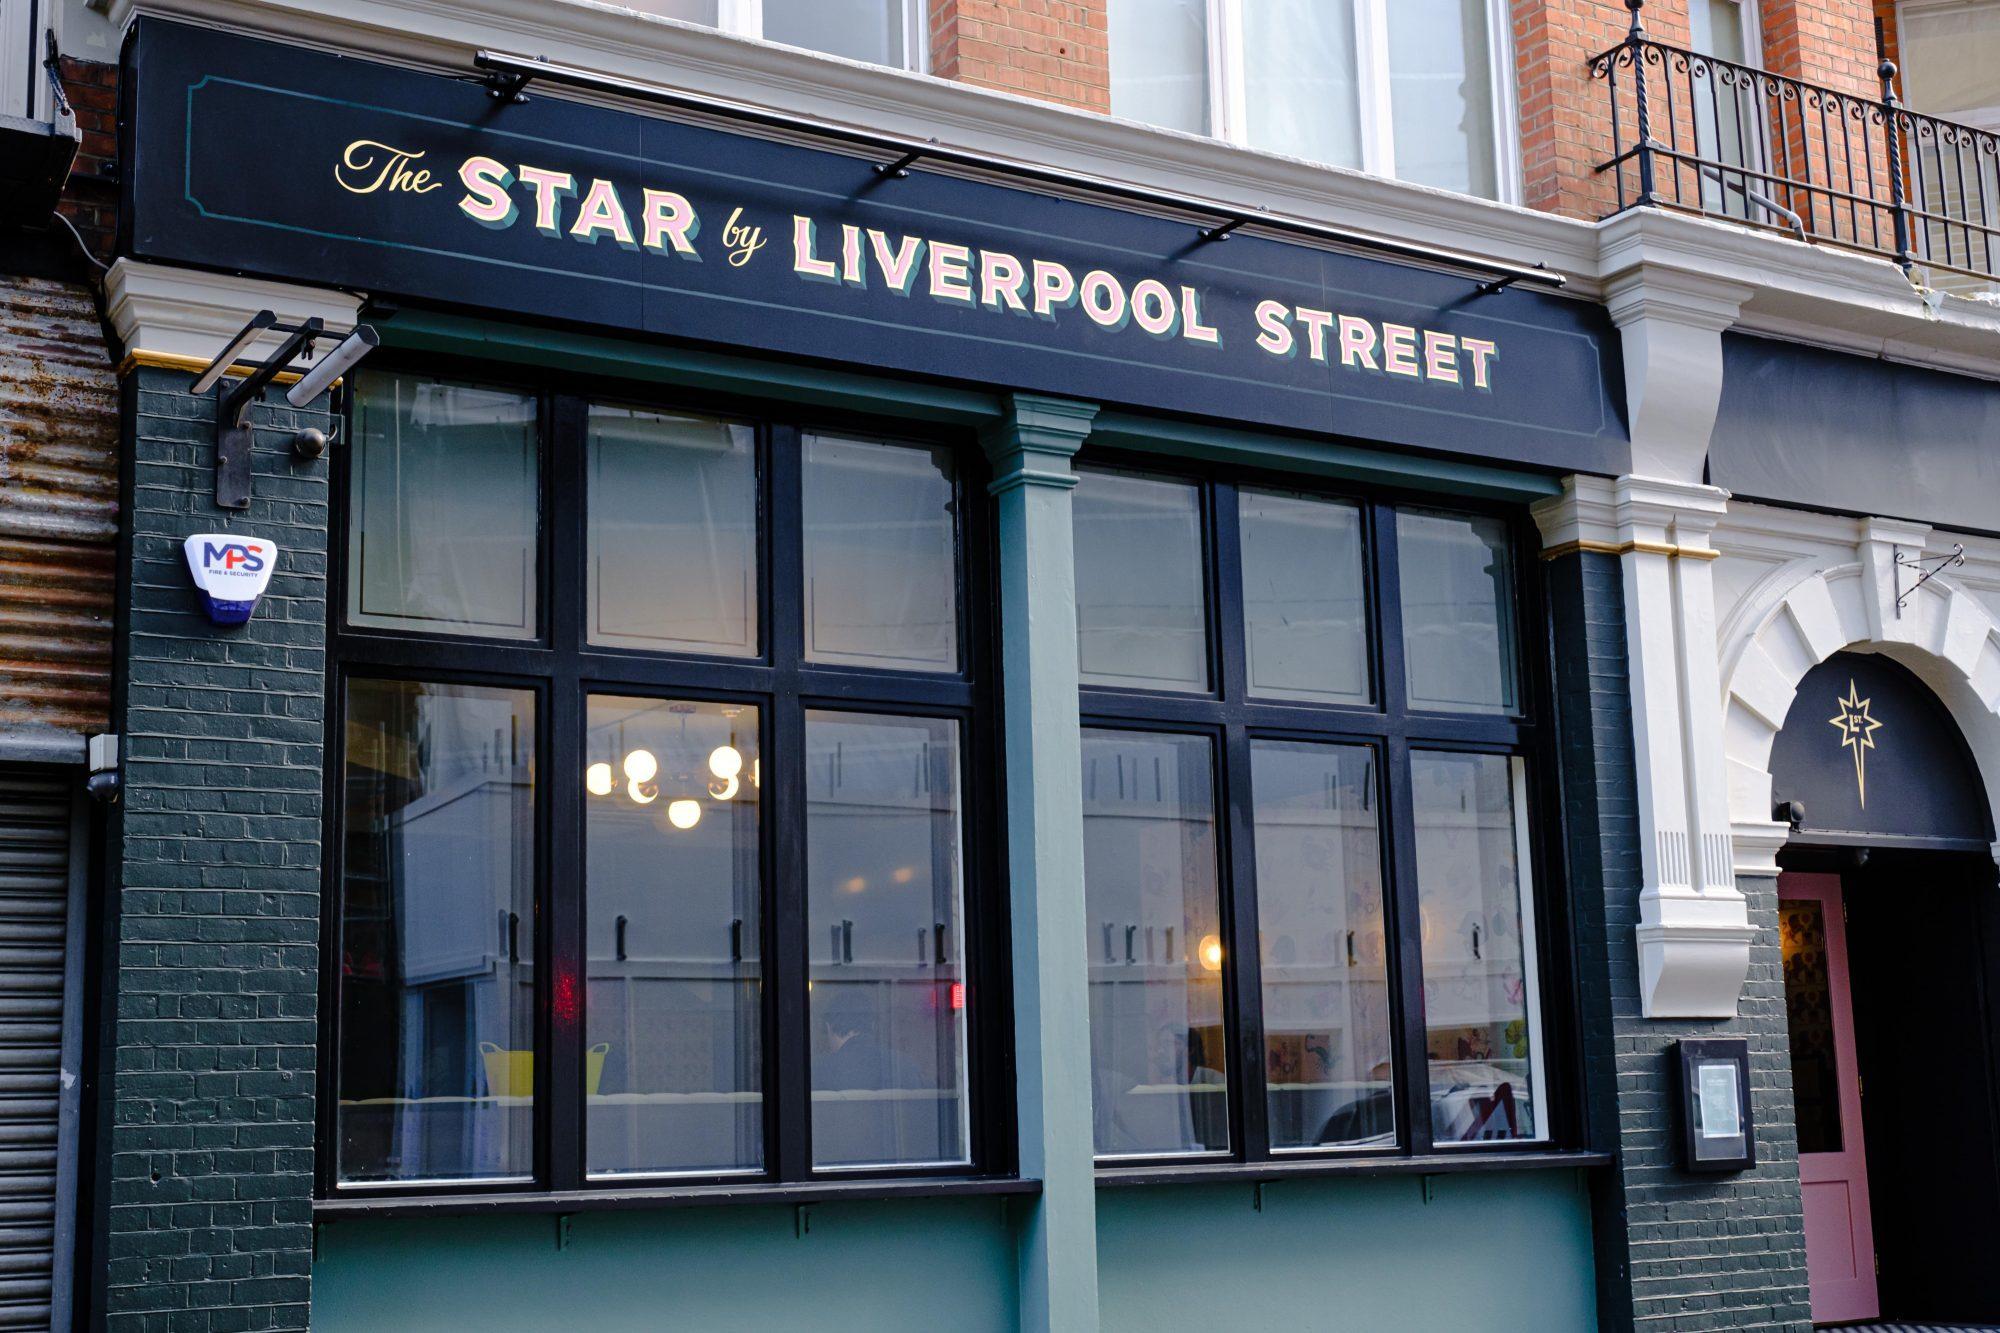 Star By Liverpool Street, The Glam Palace photo #4